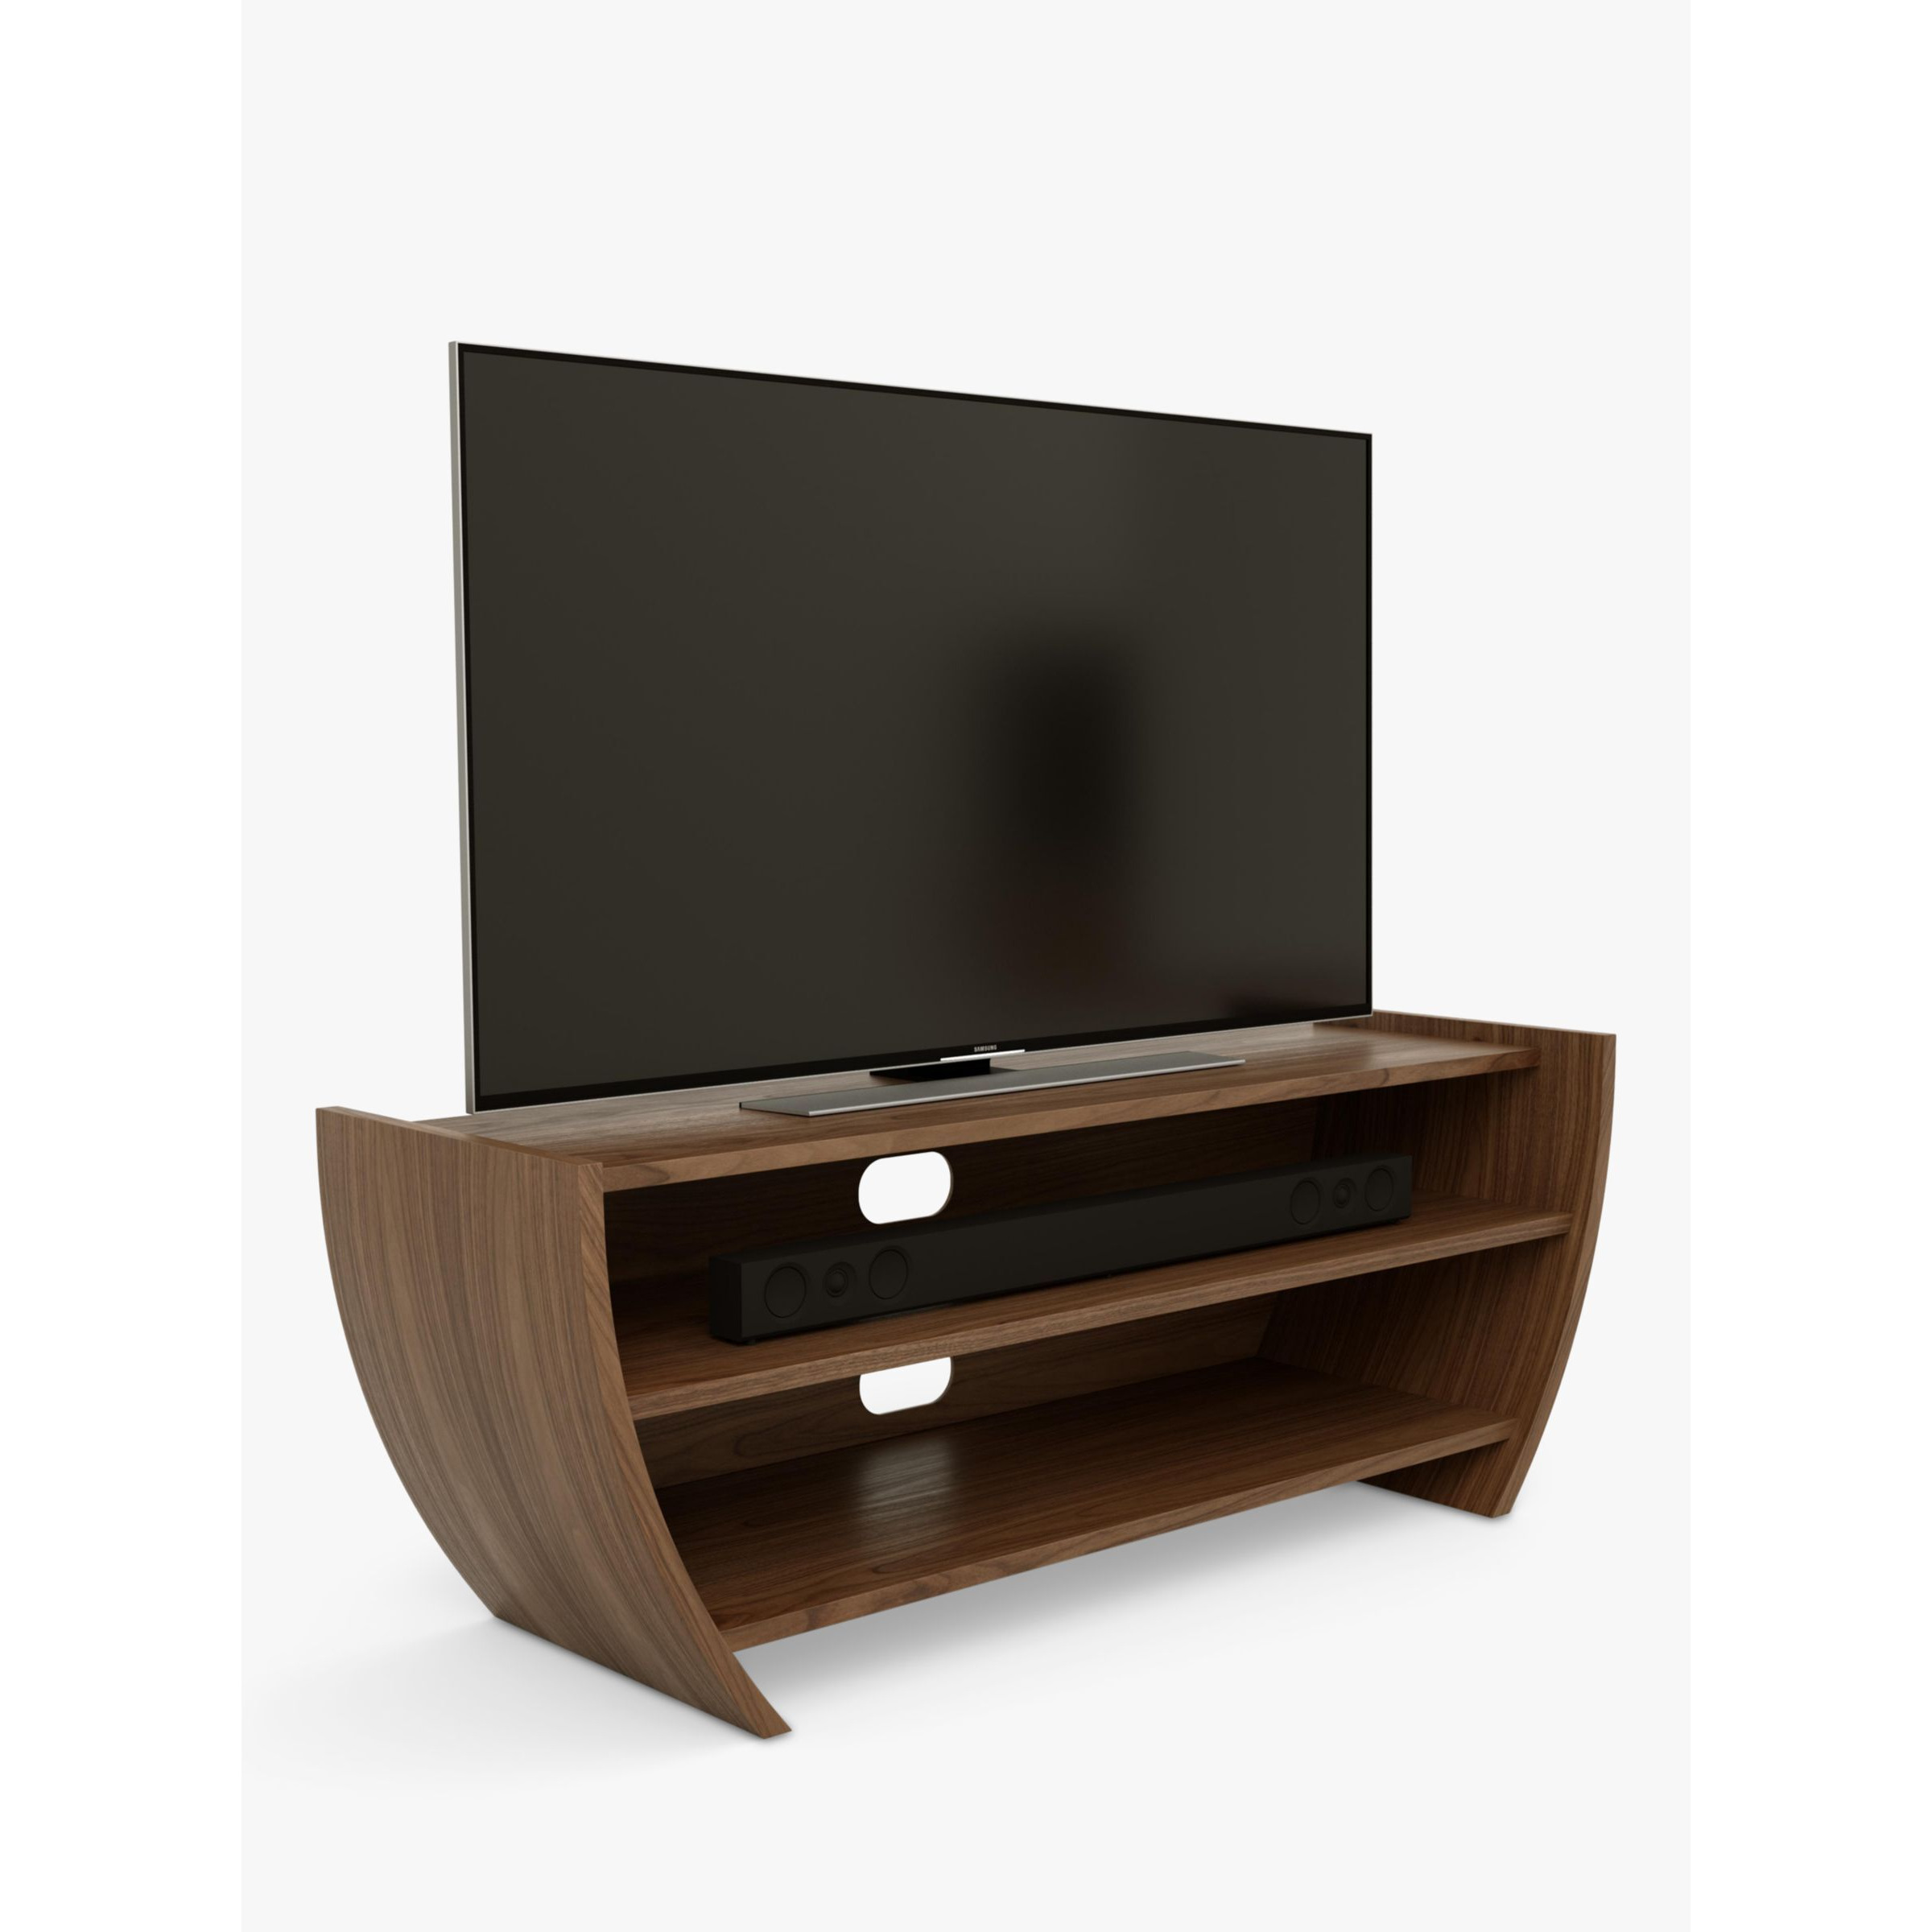 "Tom Schneider Layla 125 TV Stand for TVs up to 55""" - image 1